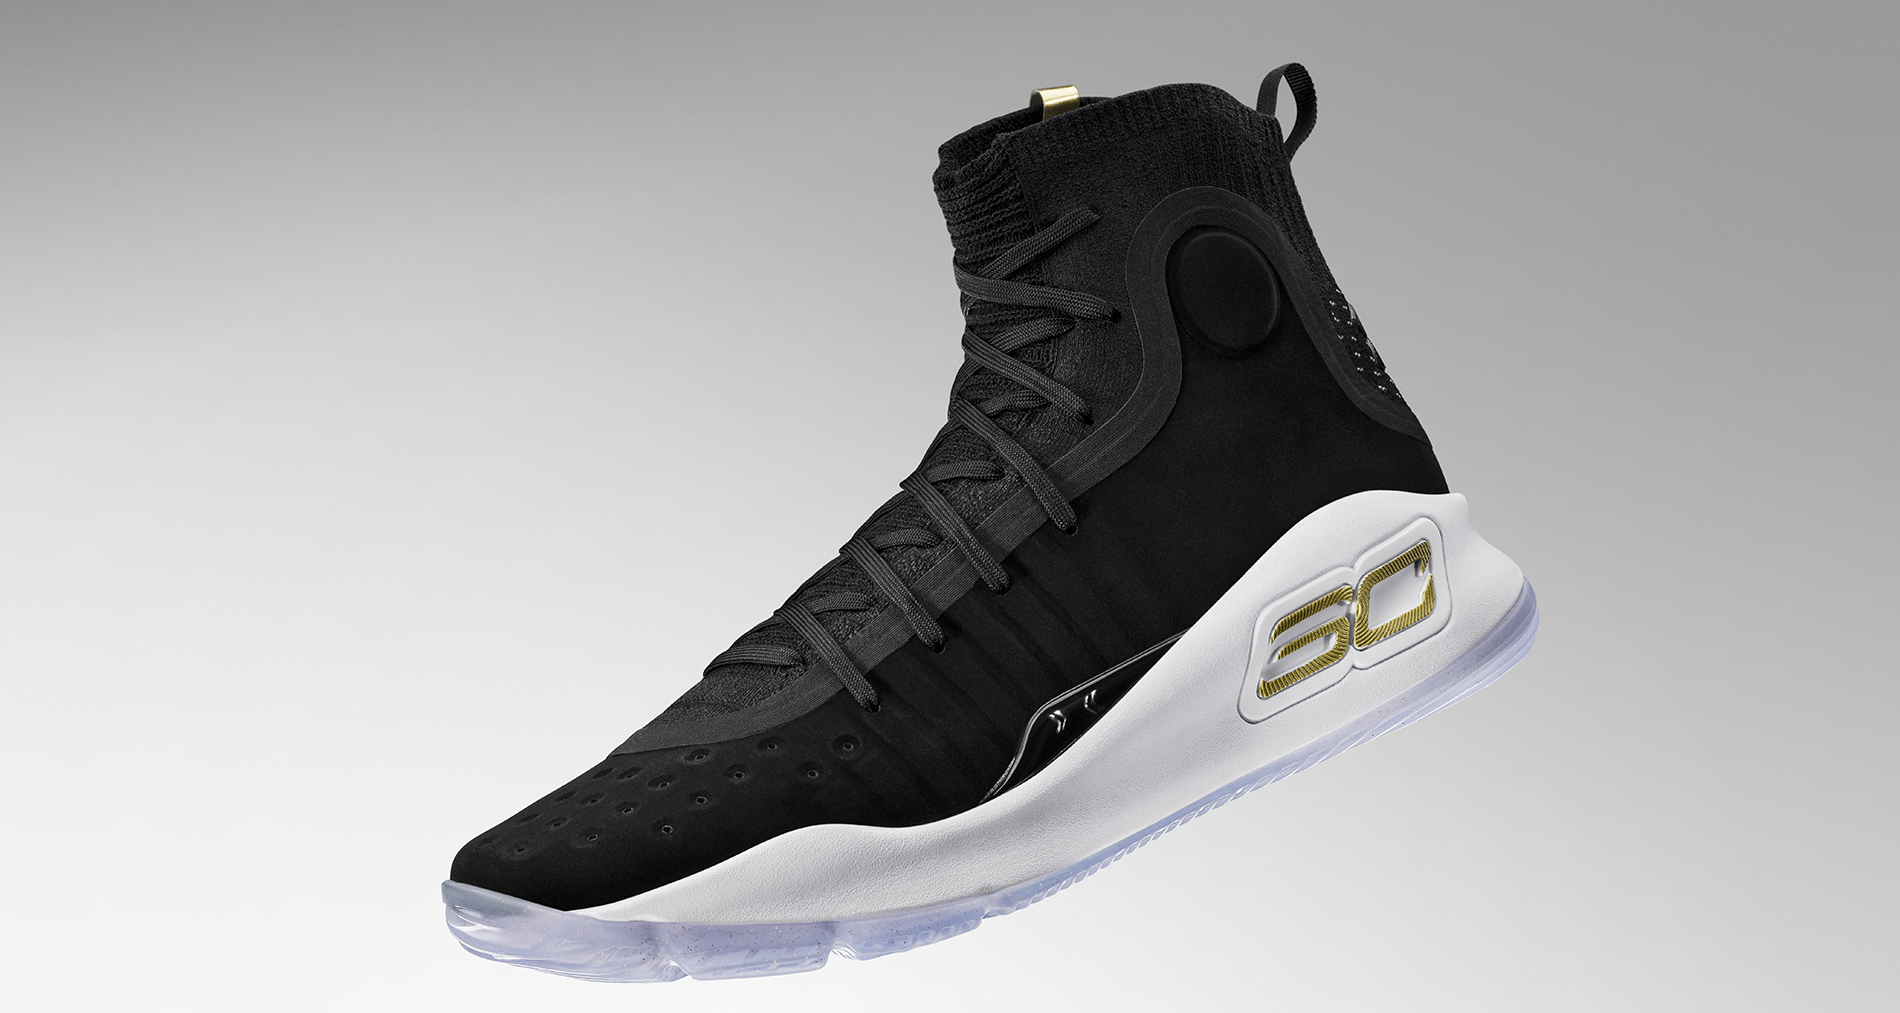 Under Armour Curry 4 "More Dimes"